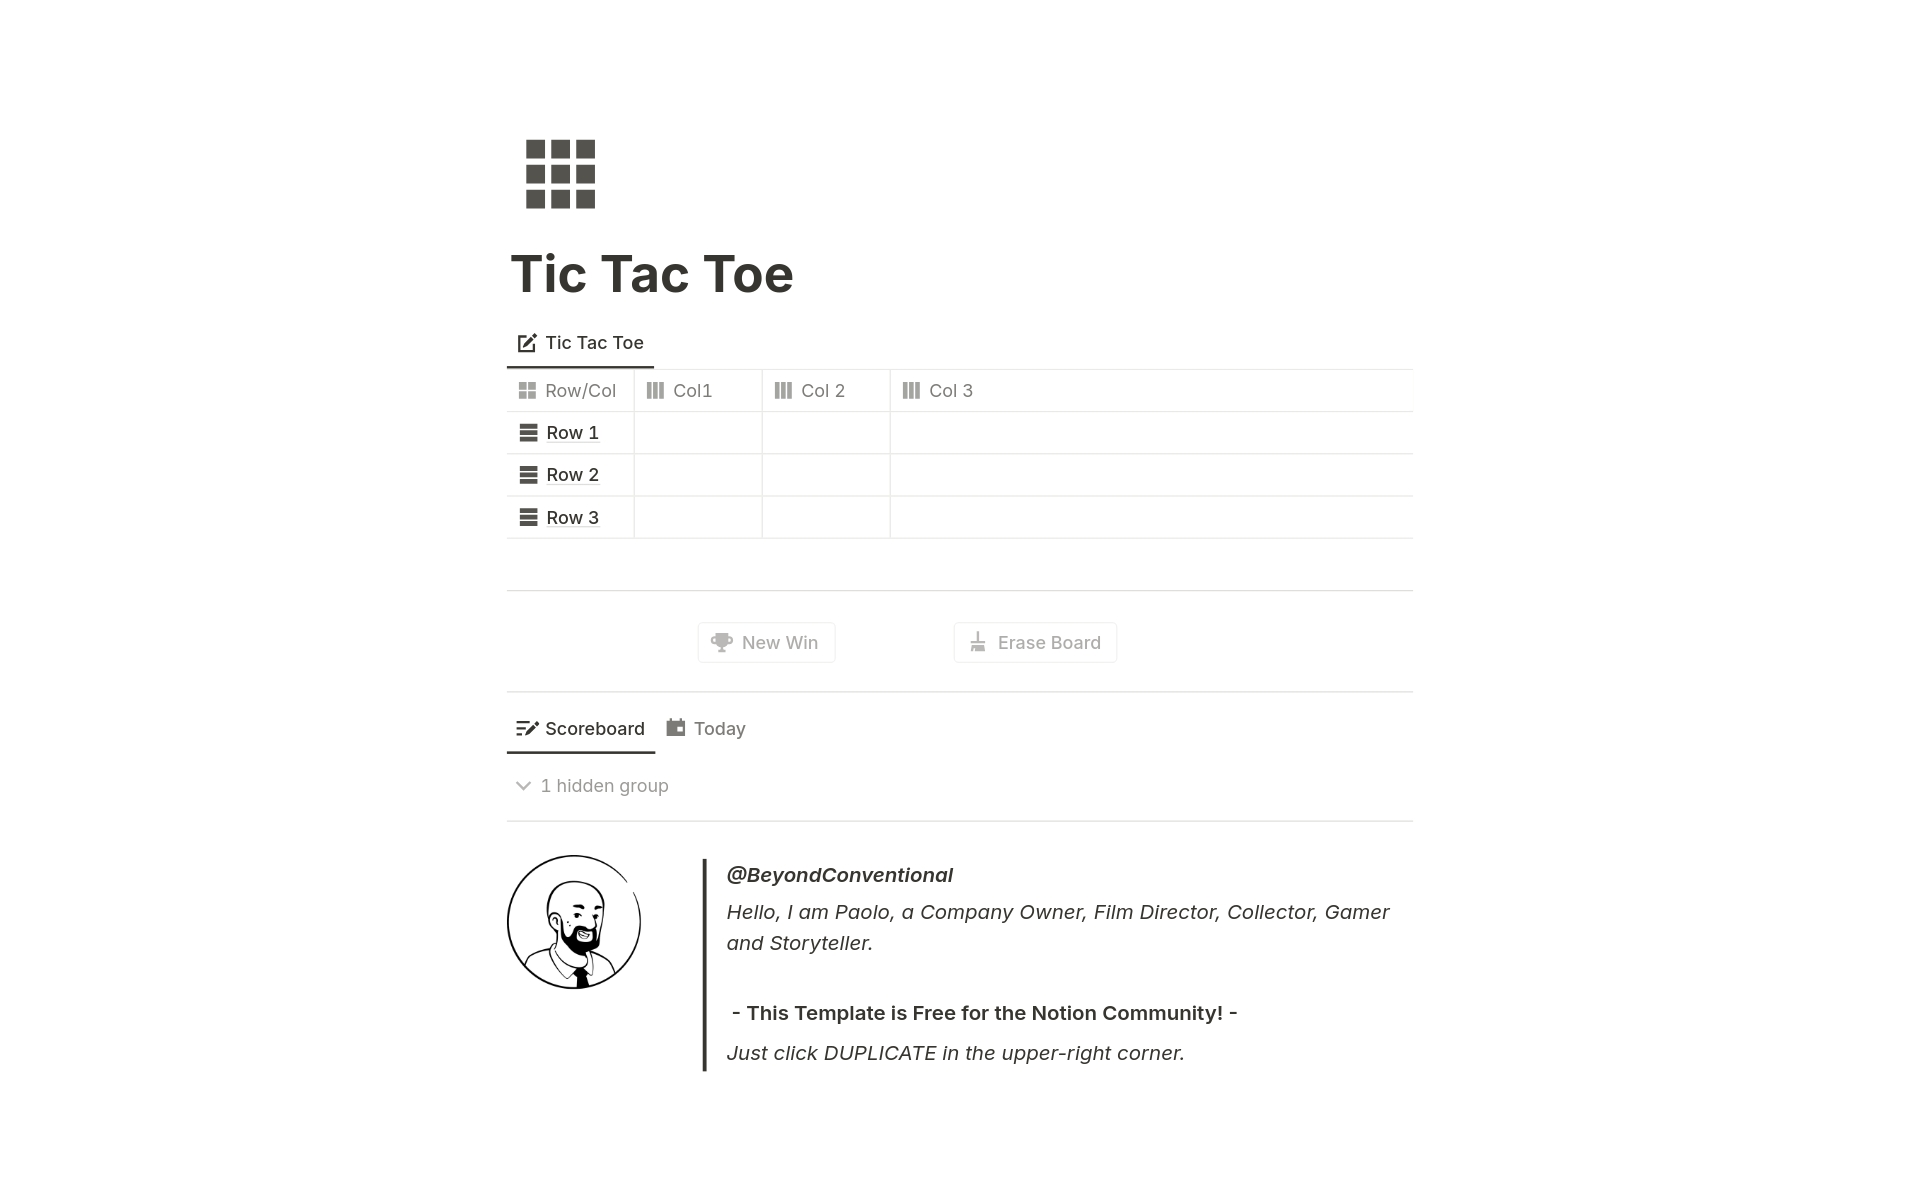 A Simple and Entertaining Tic Tac Toe game to play with your friends and colleagues!